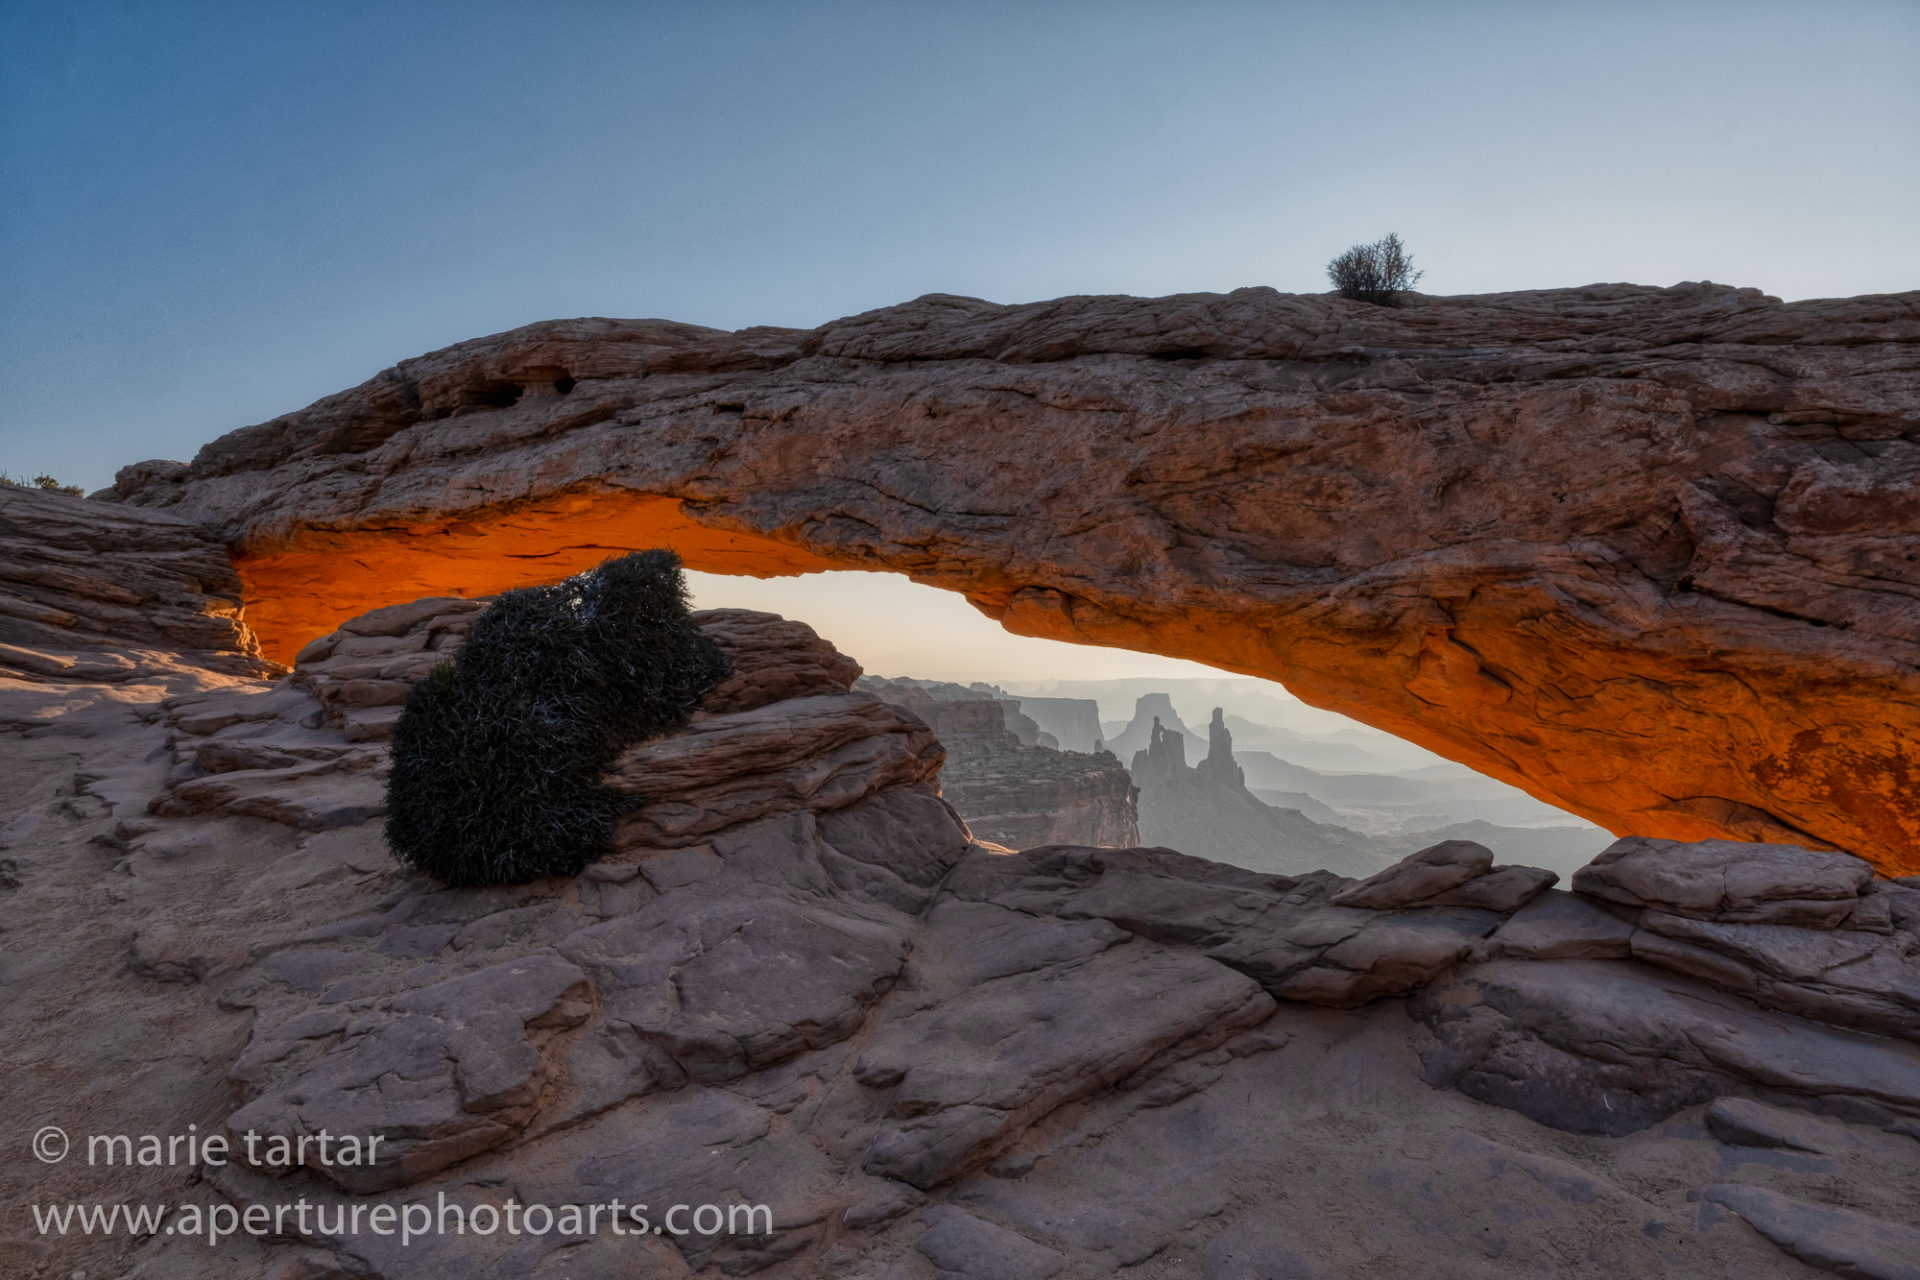 Iconic Mesa Arch in Canyonlands, near Moab, Utah